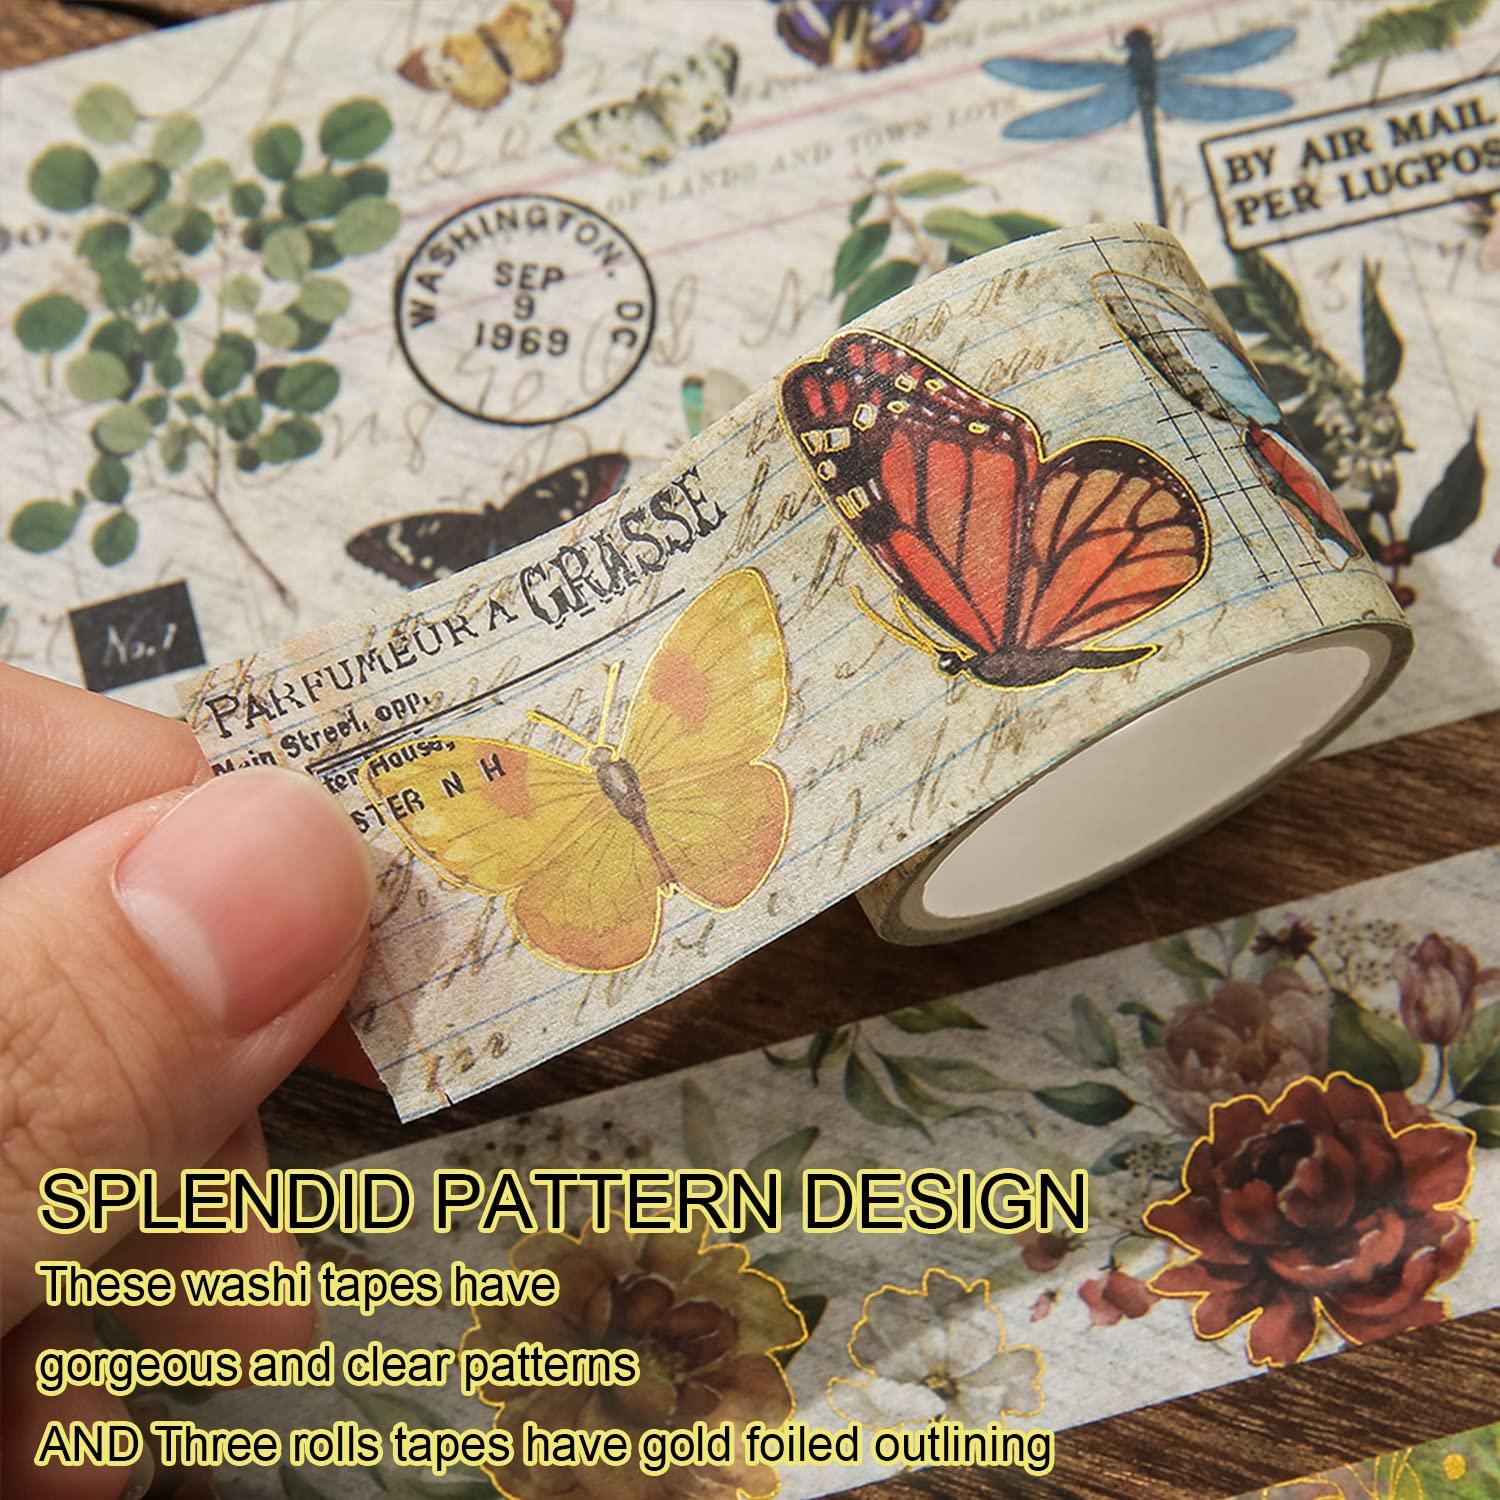 20 Sheets Vintage Aesthetic Stickers Book for Journaling - Transparent PET  Retro Flowers Floral Butterflies Mushrooms Decorative Stickers Decal Set